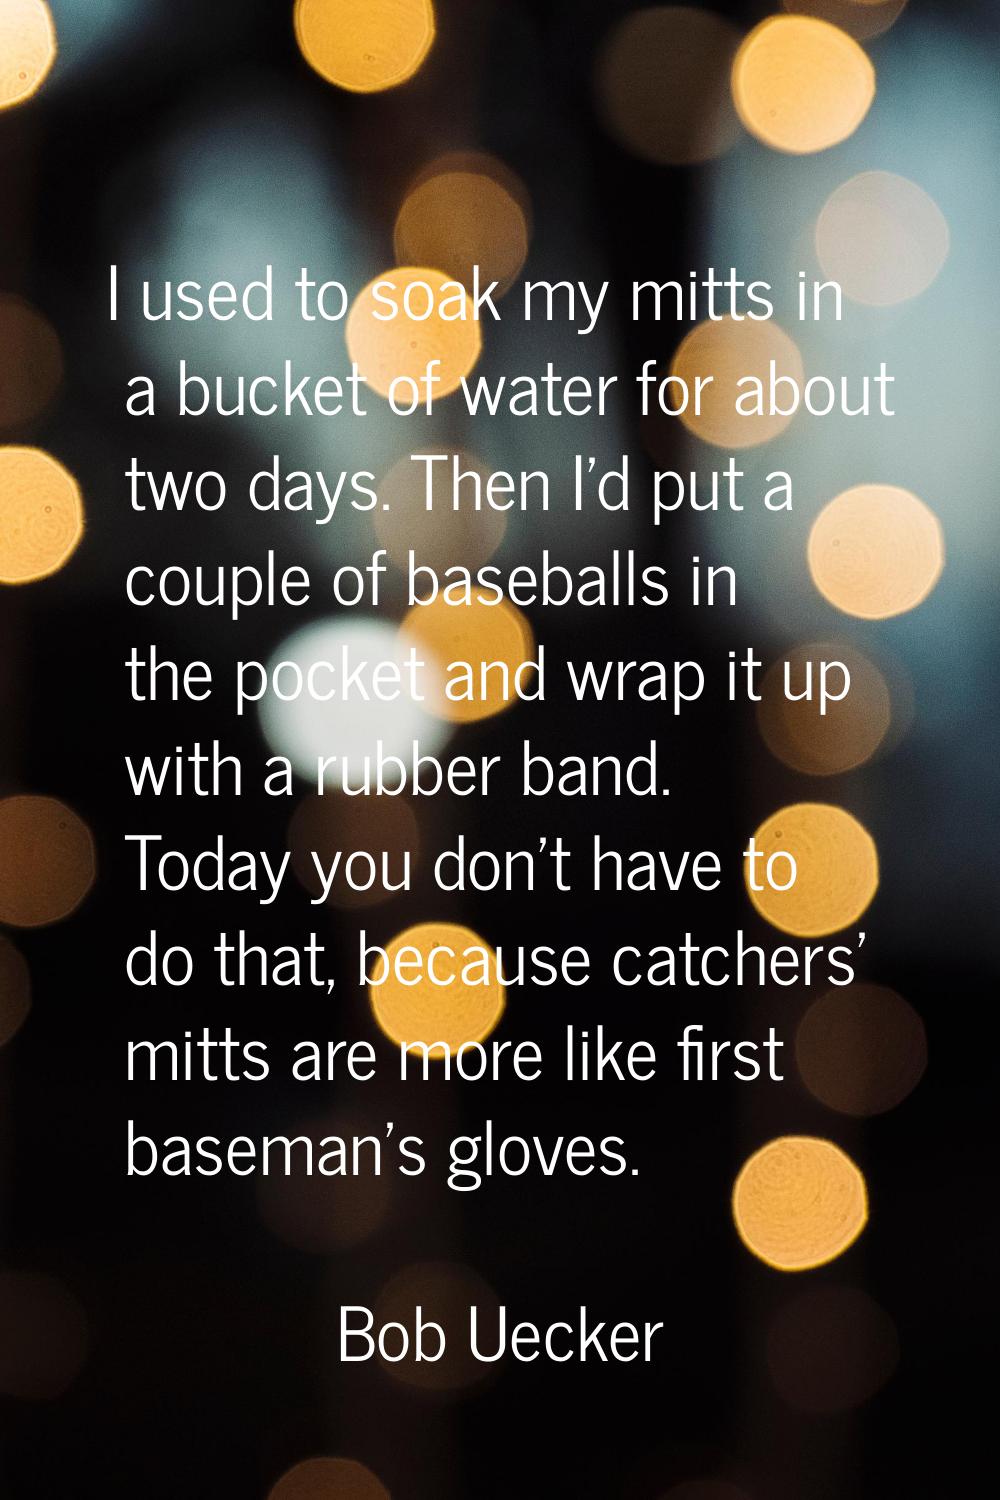 I used to soak my mitts in a bucket of water for about two days. Then I'd put a couple of baseballs